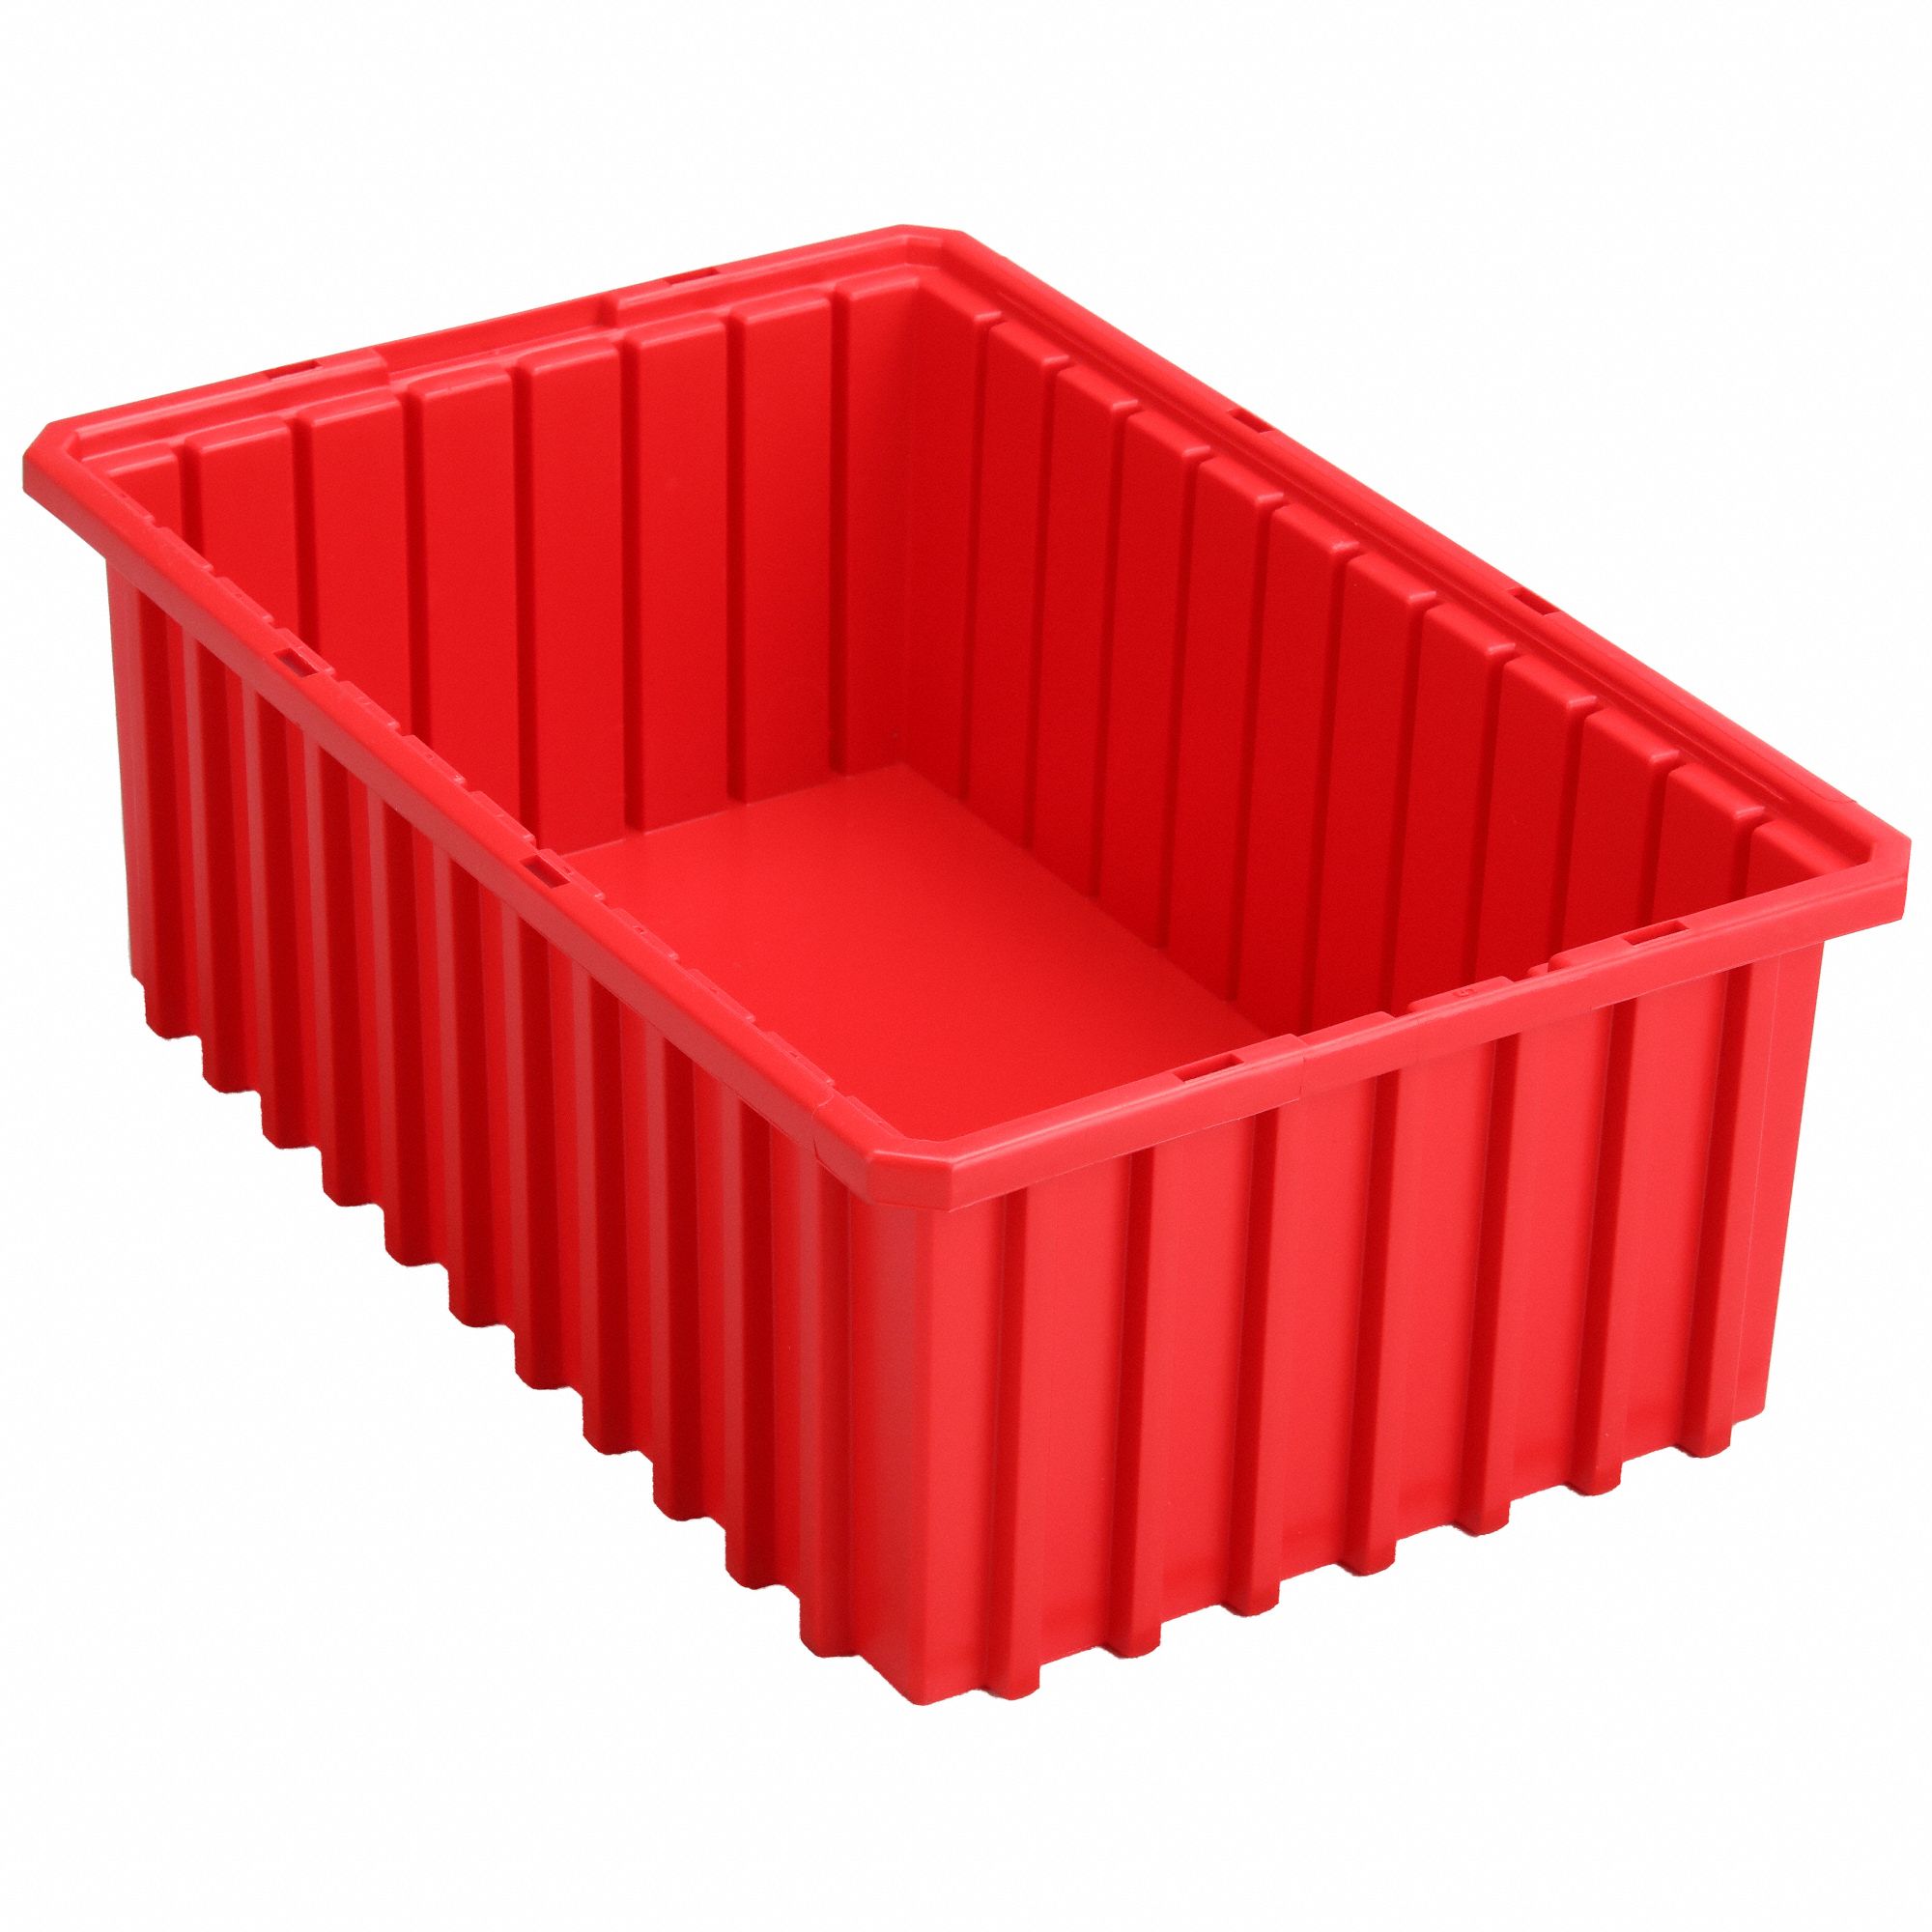 Akro-Mils 33166Red Divider Box,16-1/2 X 10-7/8 X 6 In,Red